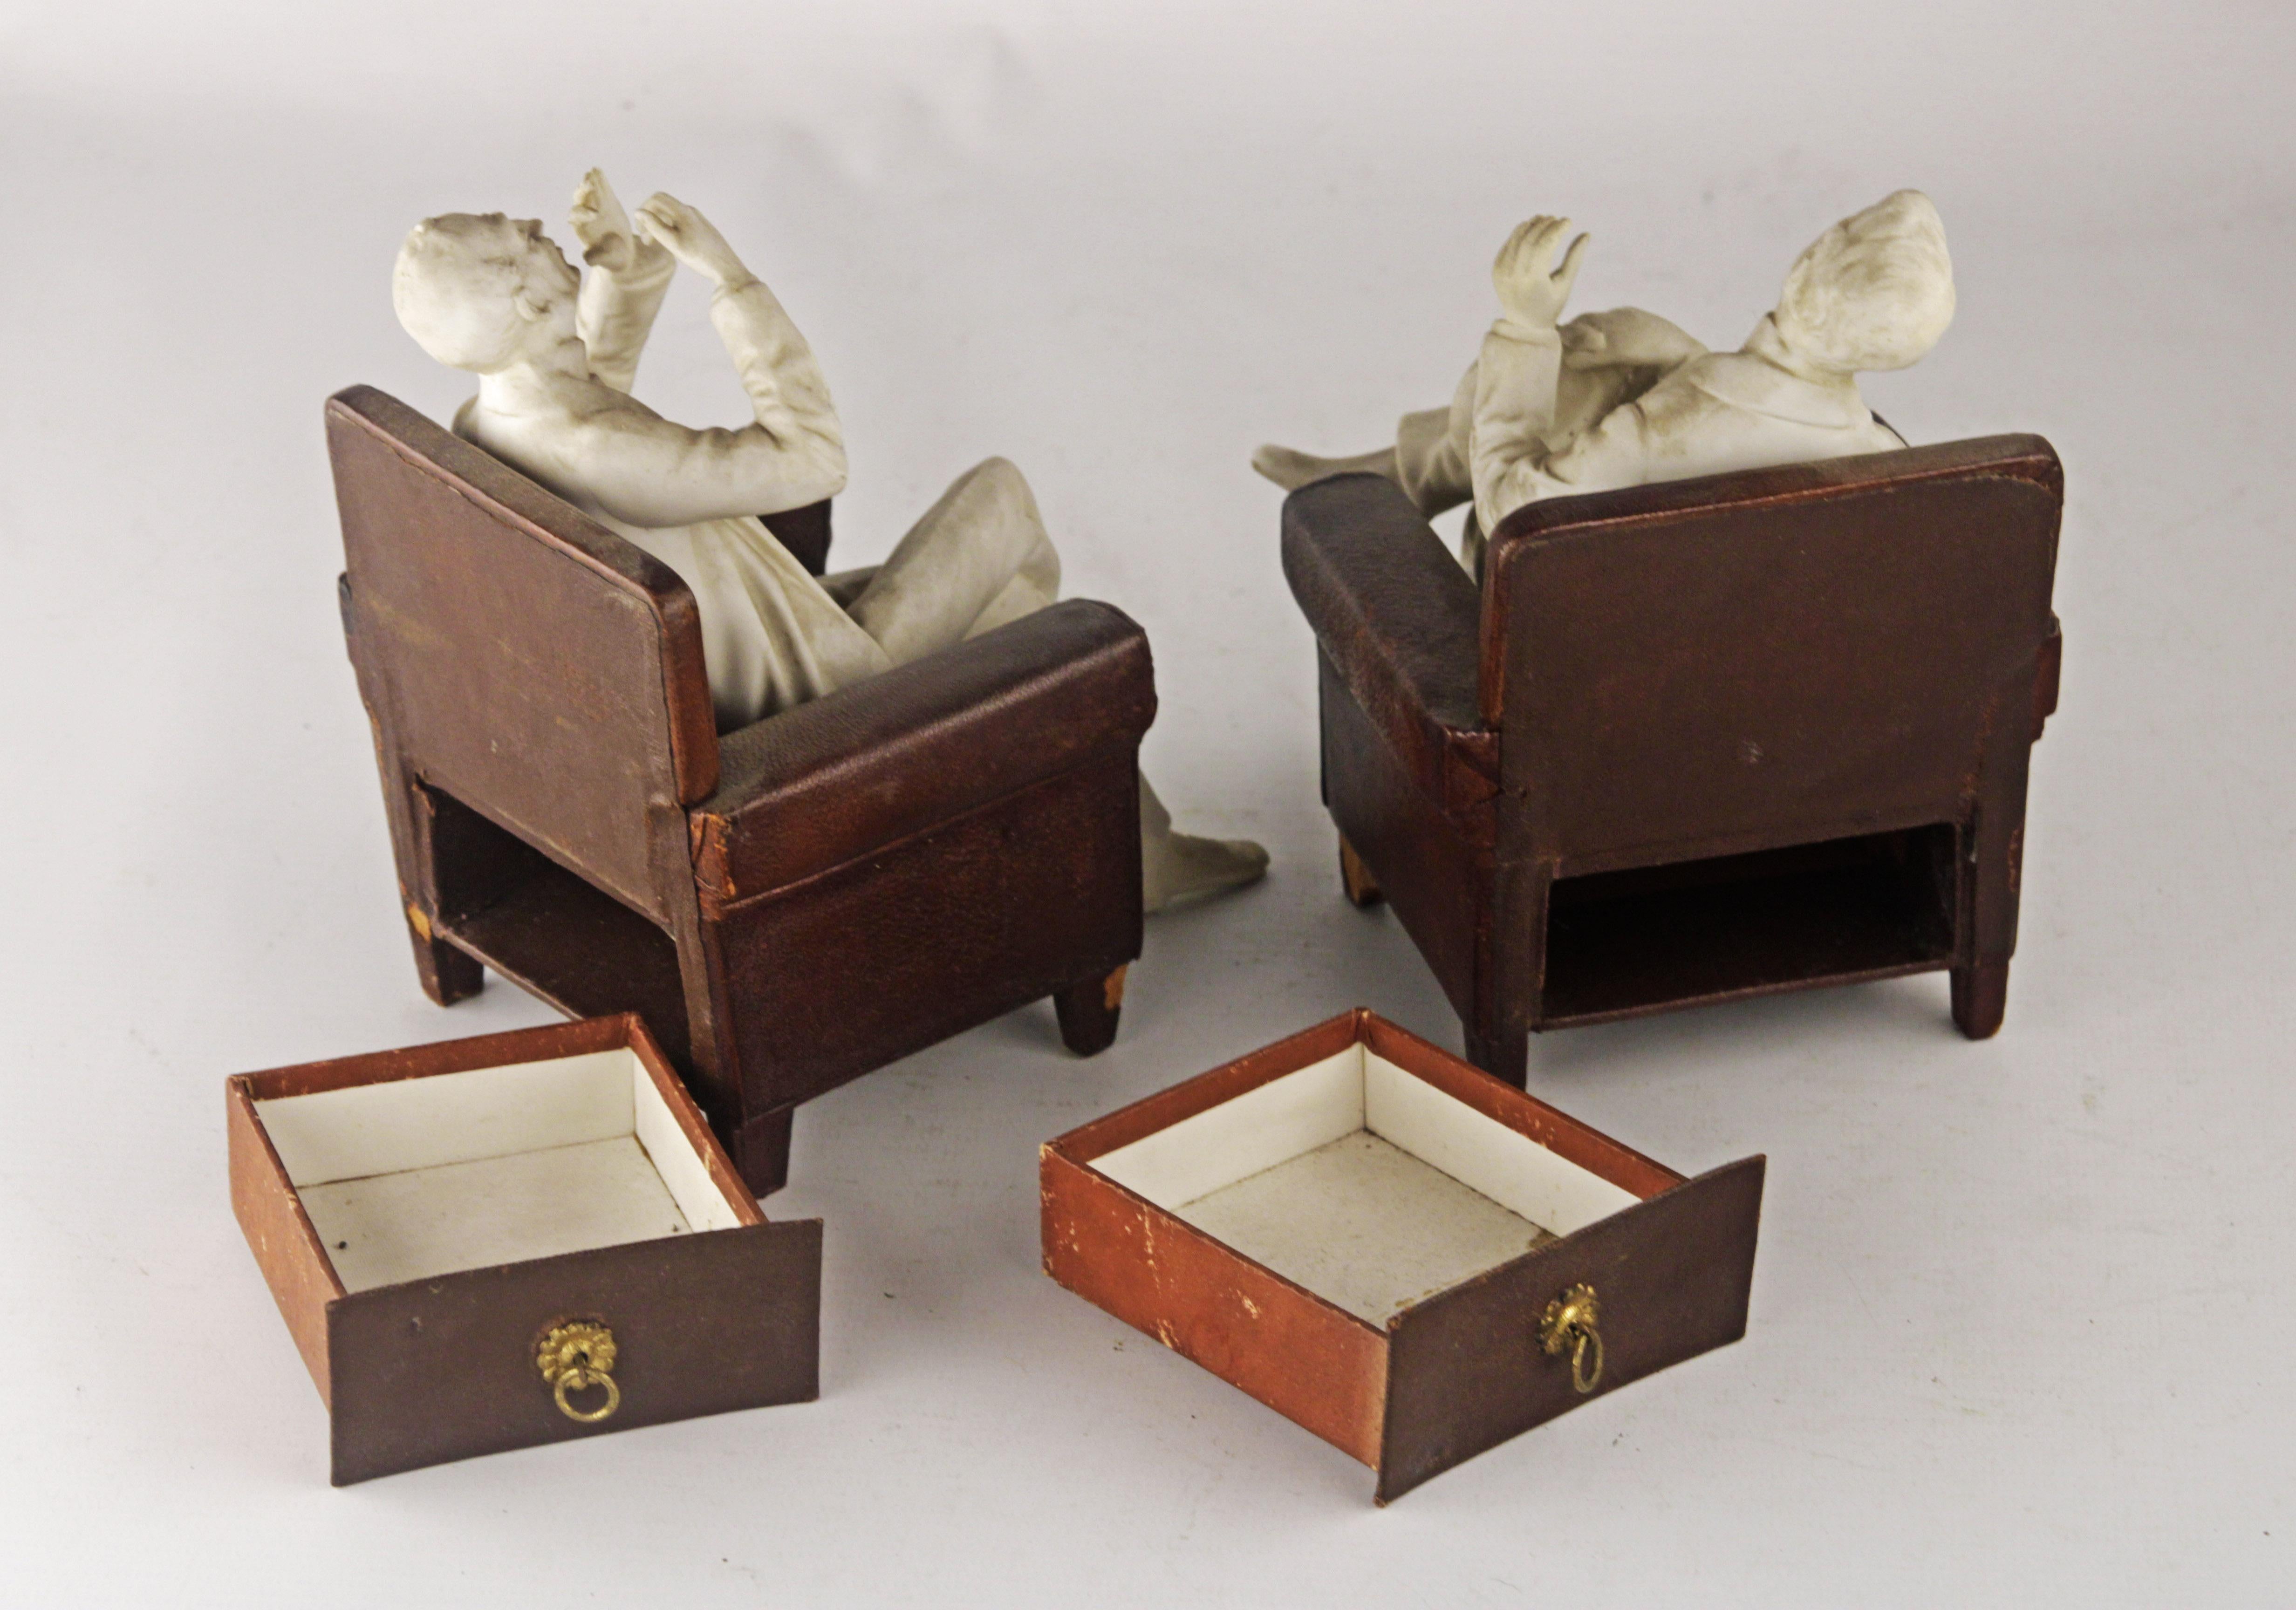 Pair of 20th Century Decorative Biscuit Porcelain Sculptures with Jewelry Boxes In Good Condition For Sale In North Miami, FL